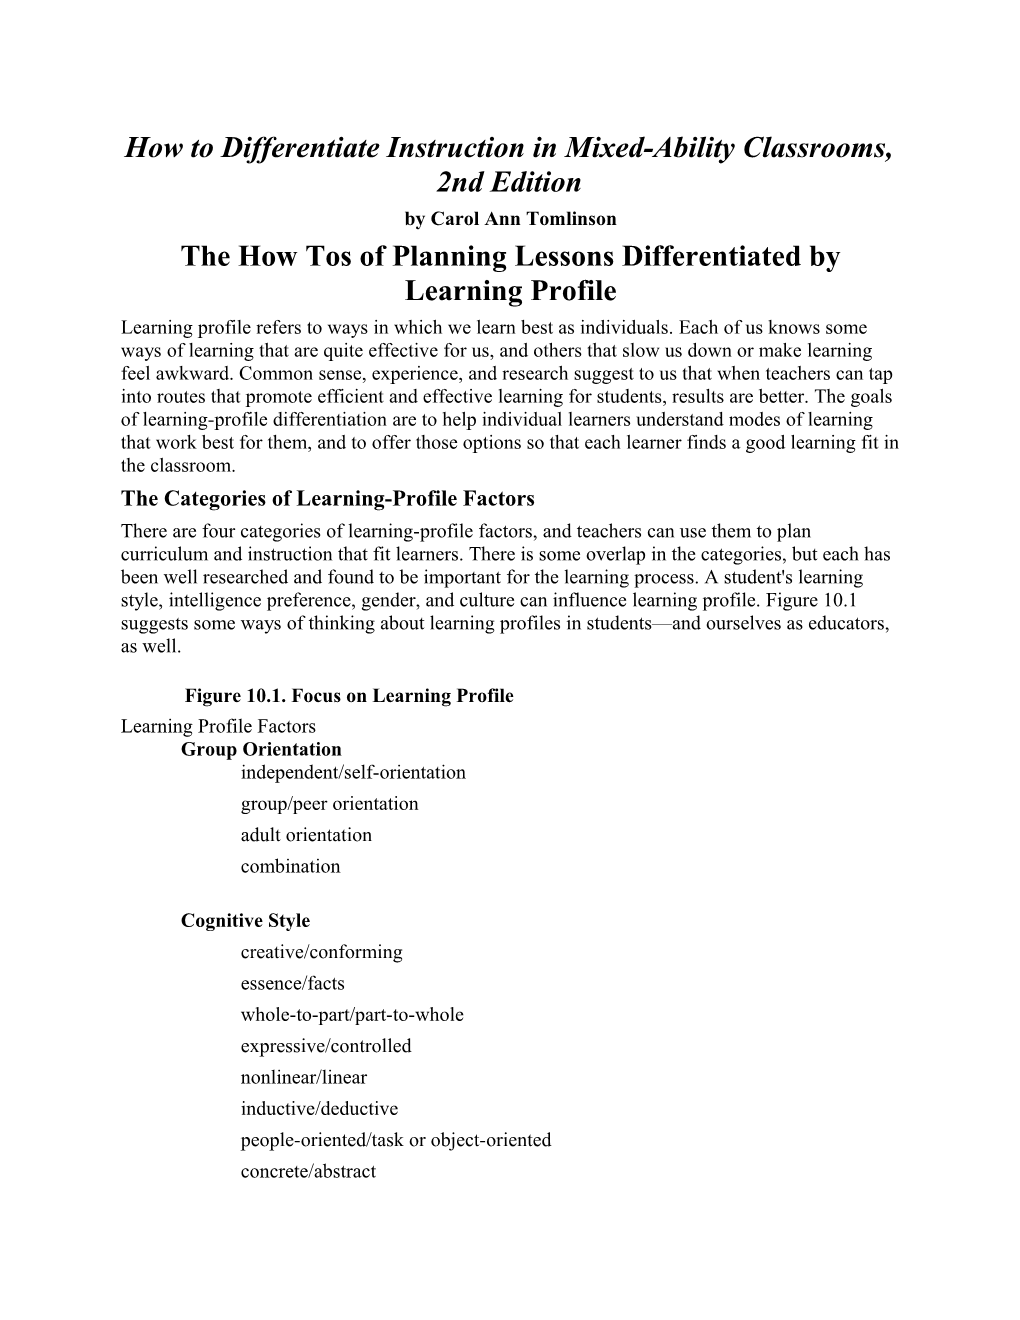 How to Differentiate Instruction in Mixed-Ability Classrooms, 2Nd Edition